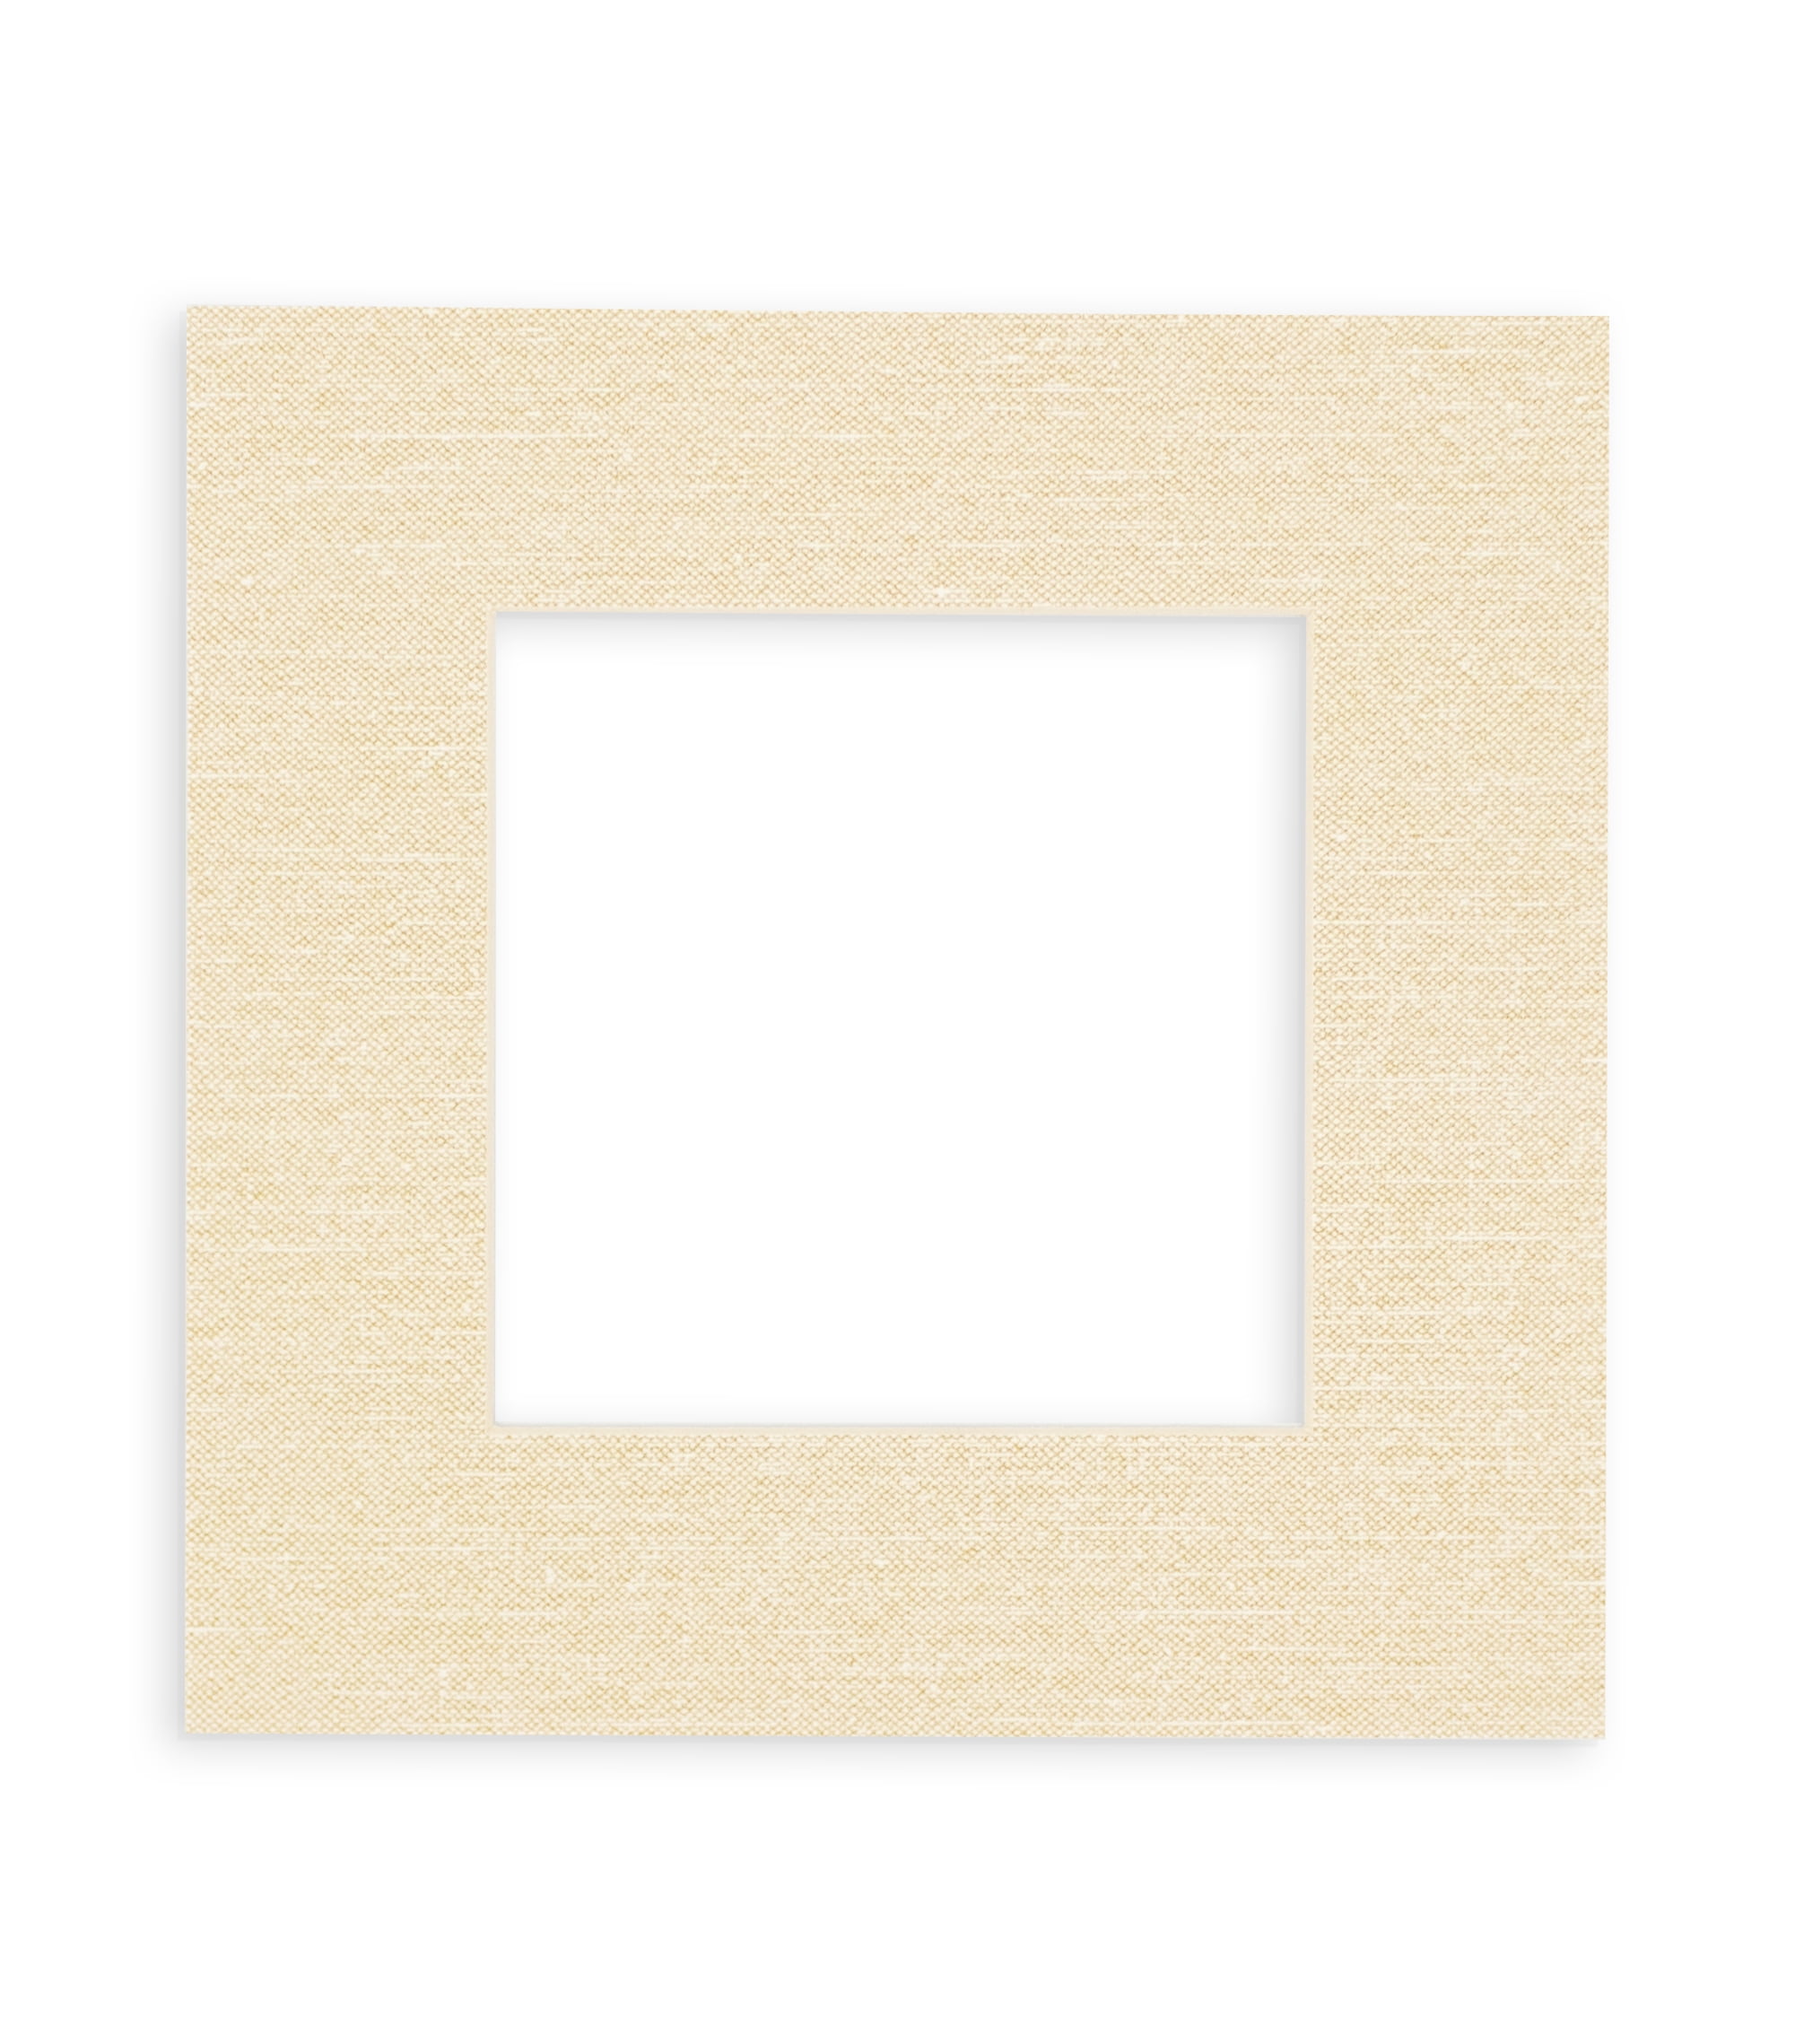 Americanflat 8x8 Picture Frame with 4x4 Mat - Wood with Glass